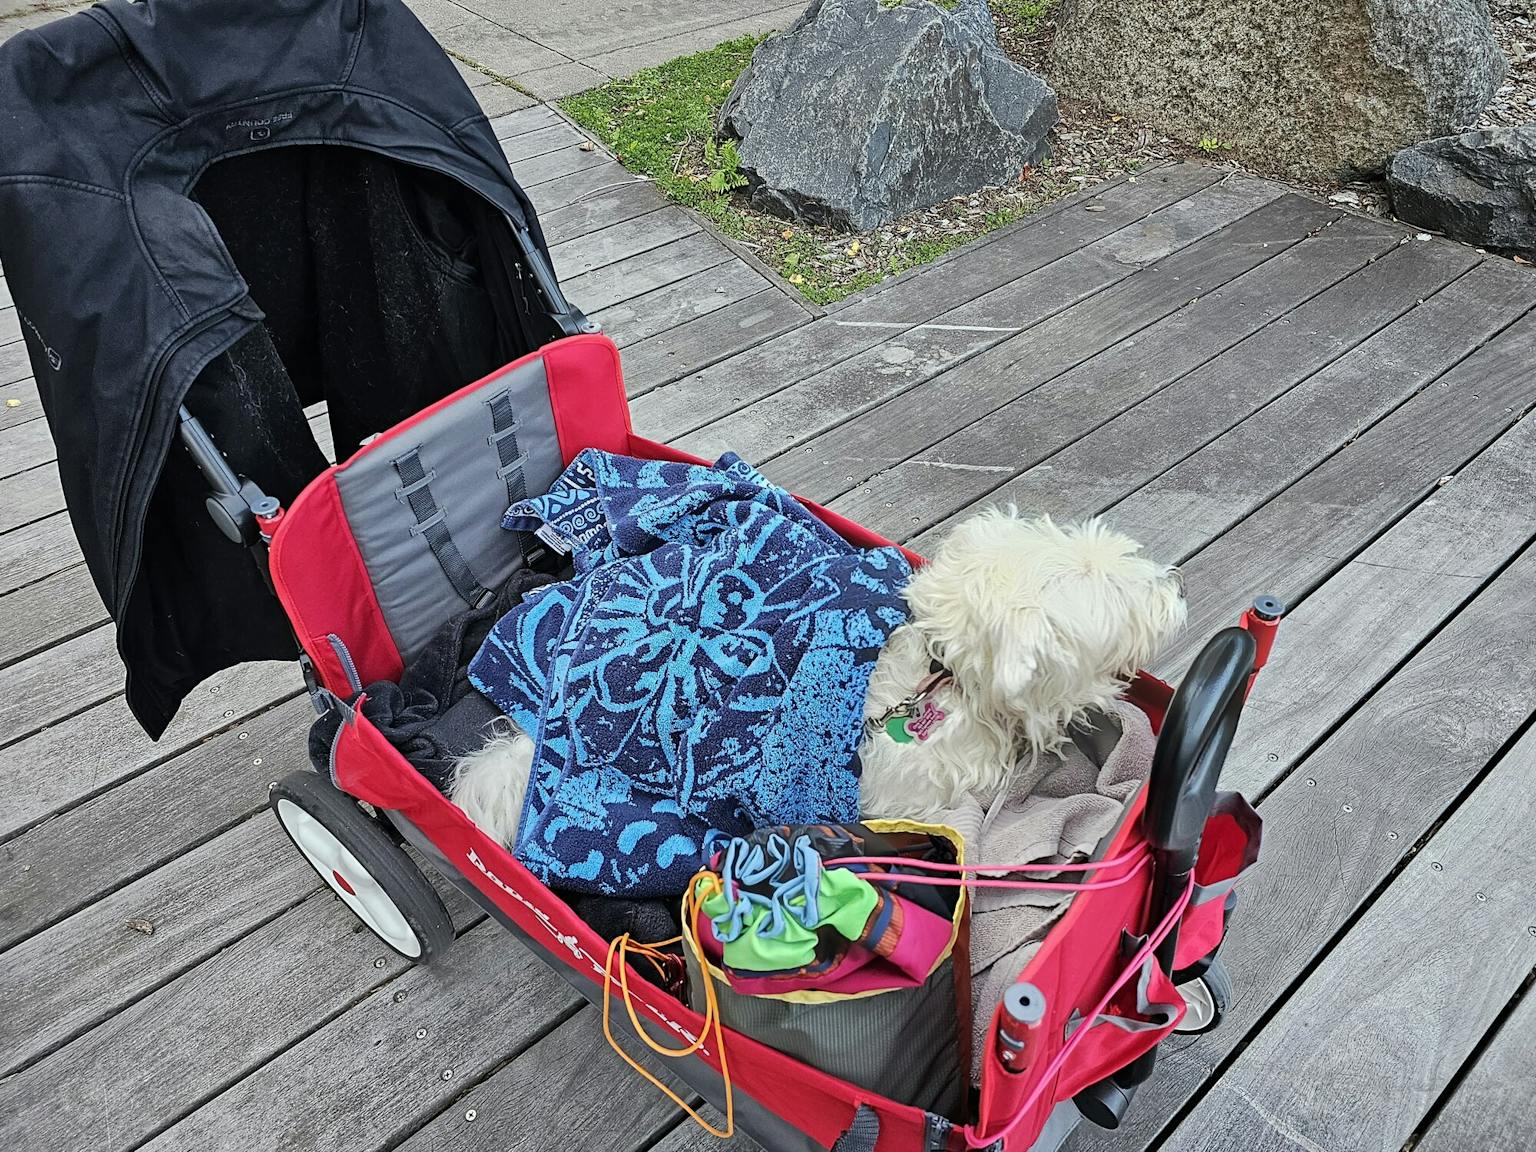 Roxy in the red wagon bundled up against the cold winds of Duluth's canal park in October